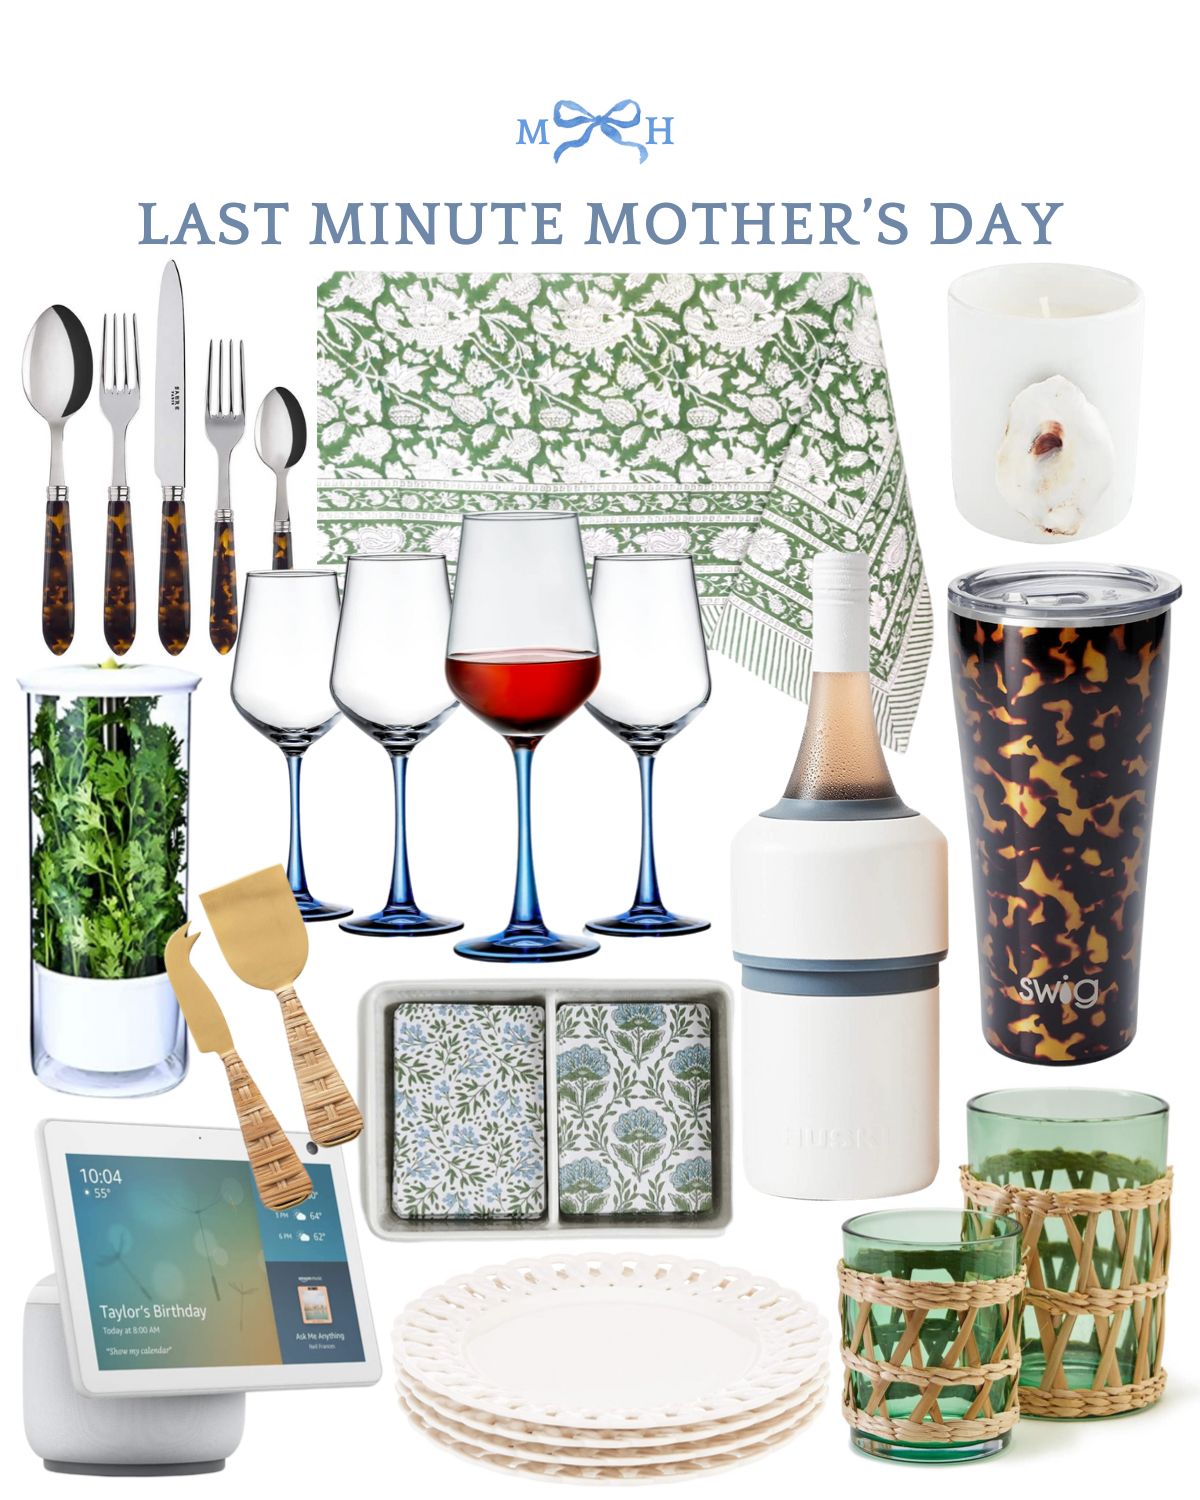 Last Minute Mother’s Day Gifts | Amazon (US)